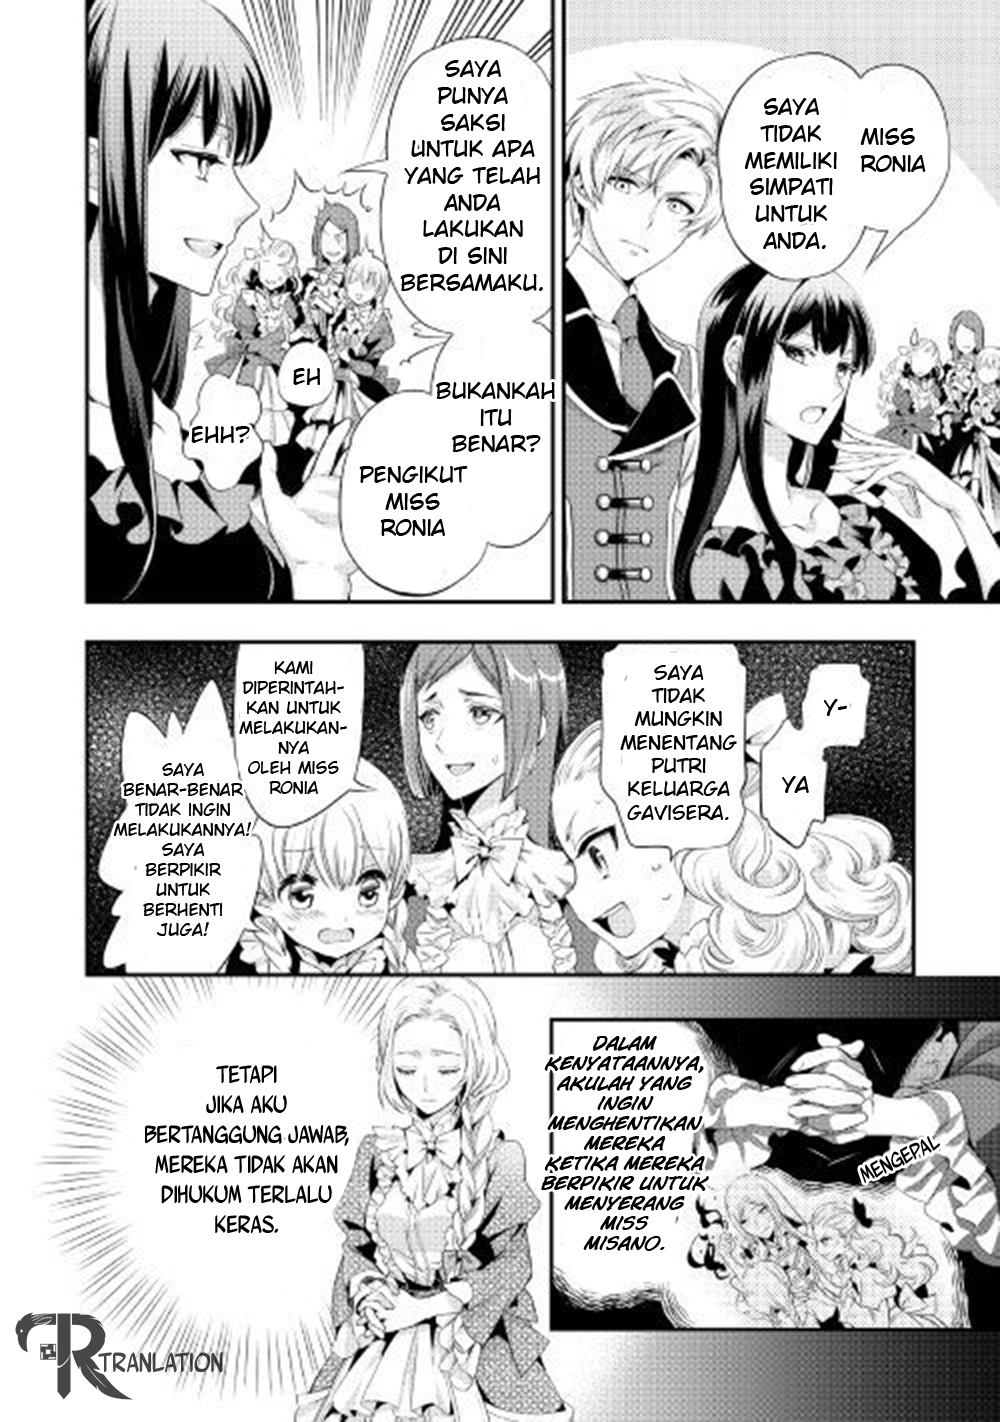 Milady Just Wants to Relax Chapter 01 13